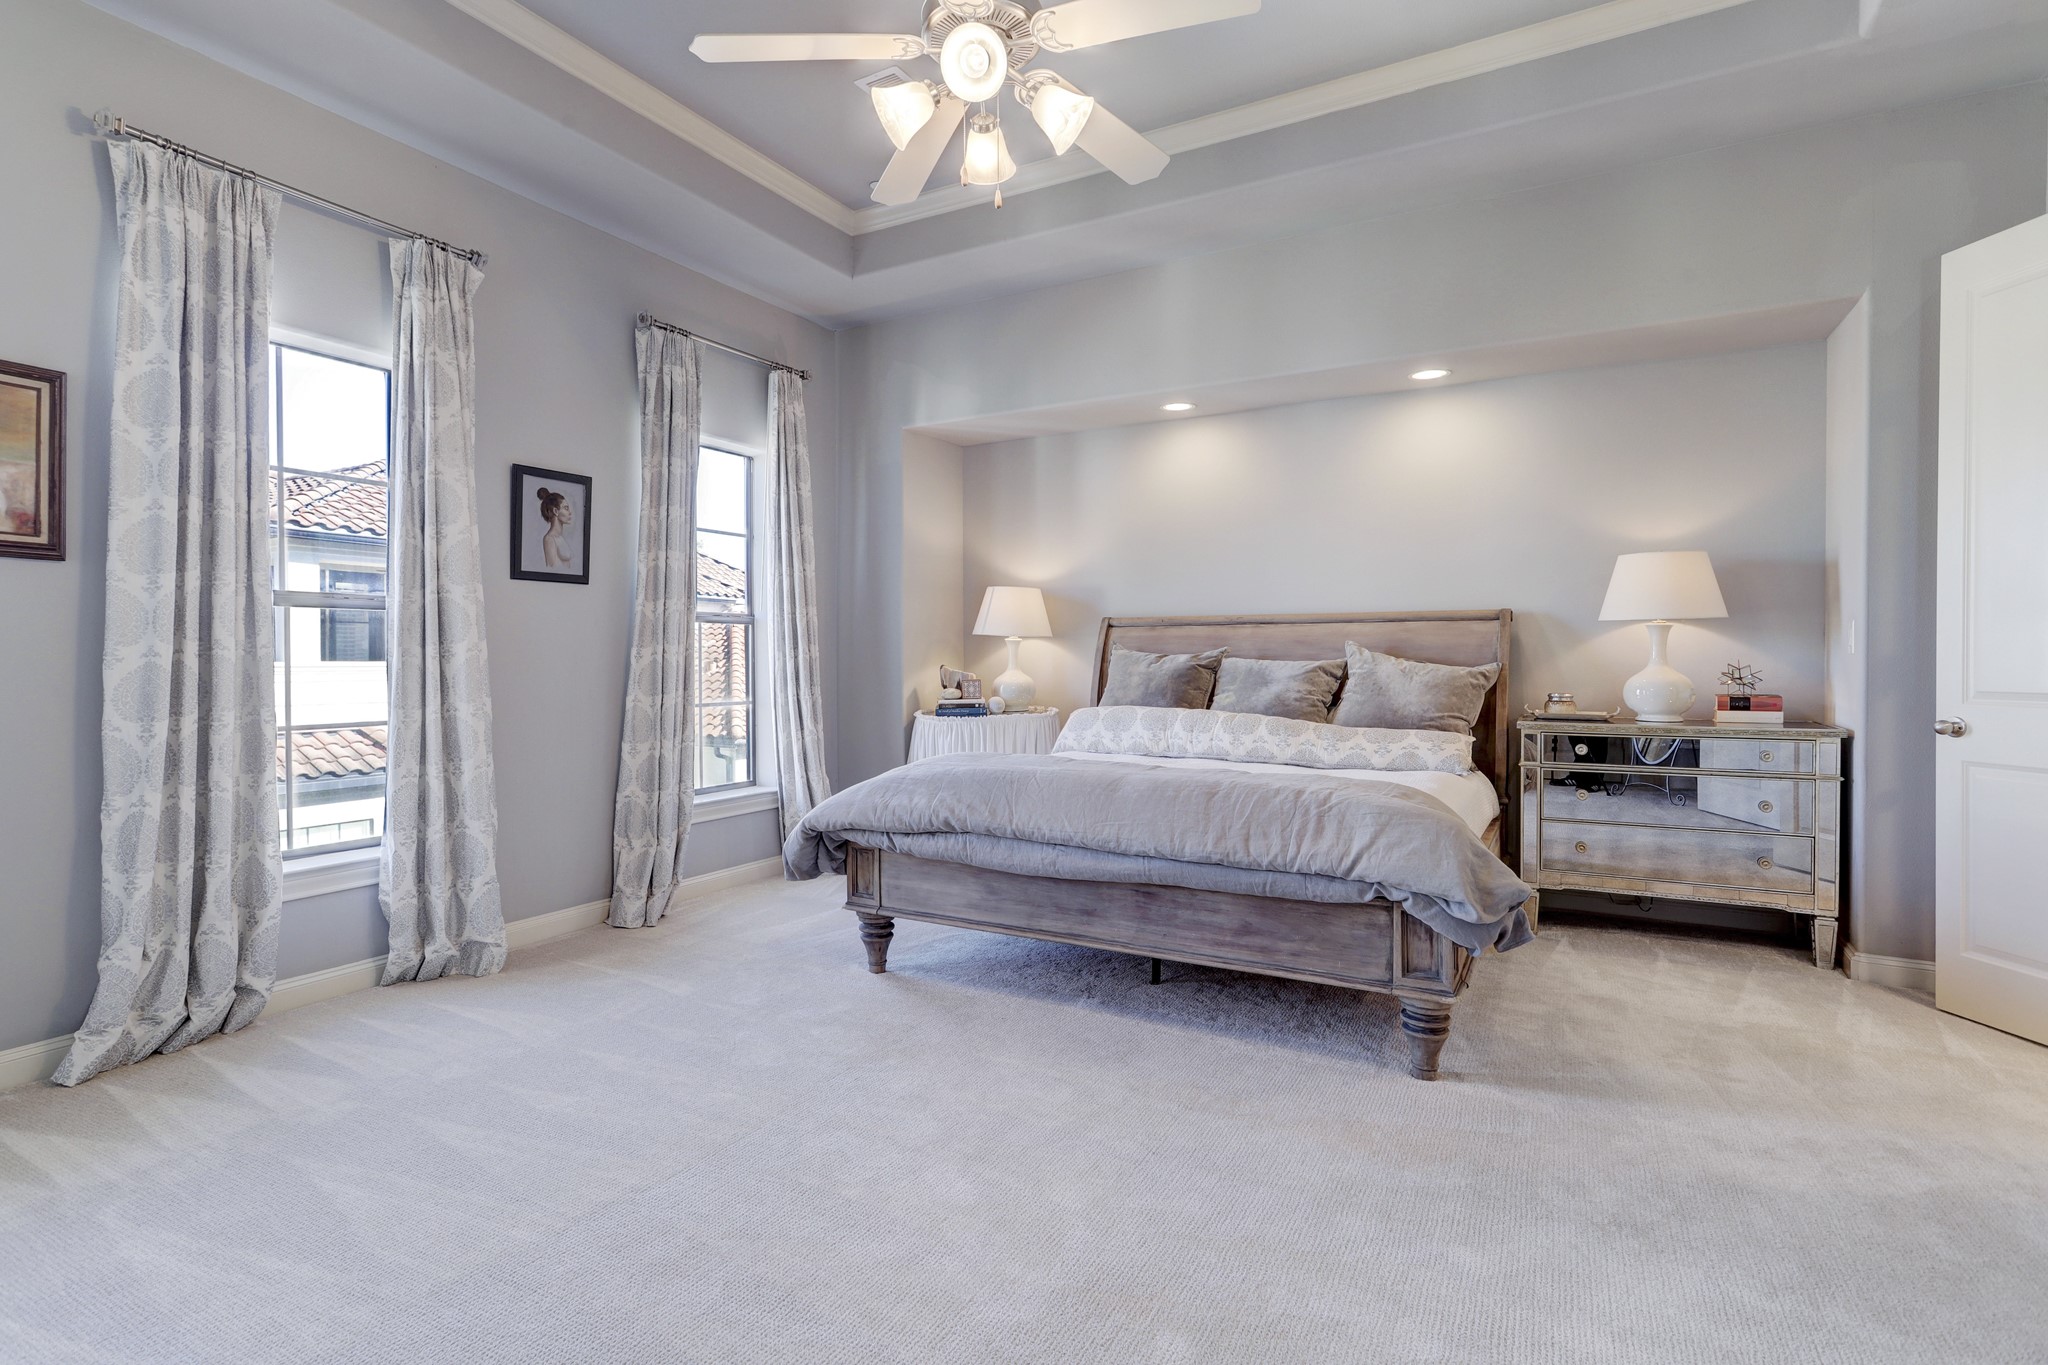 Neutral wall color and carpet selection creates a tranquil feel throughout.